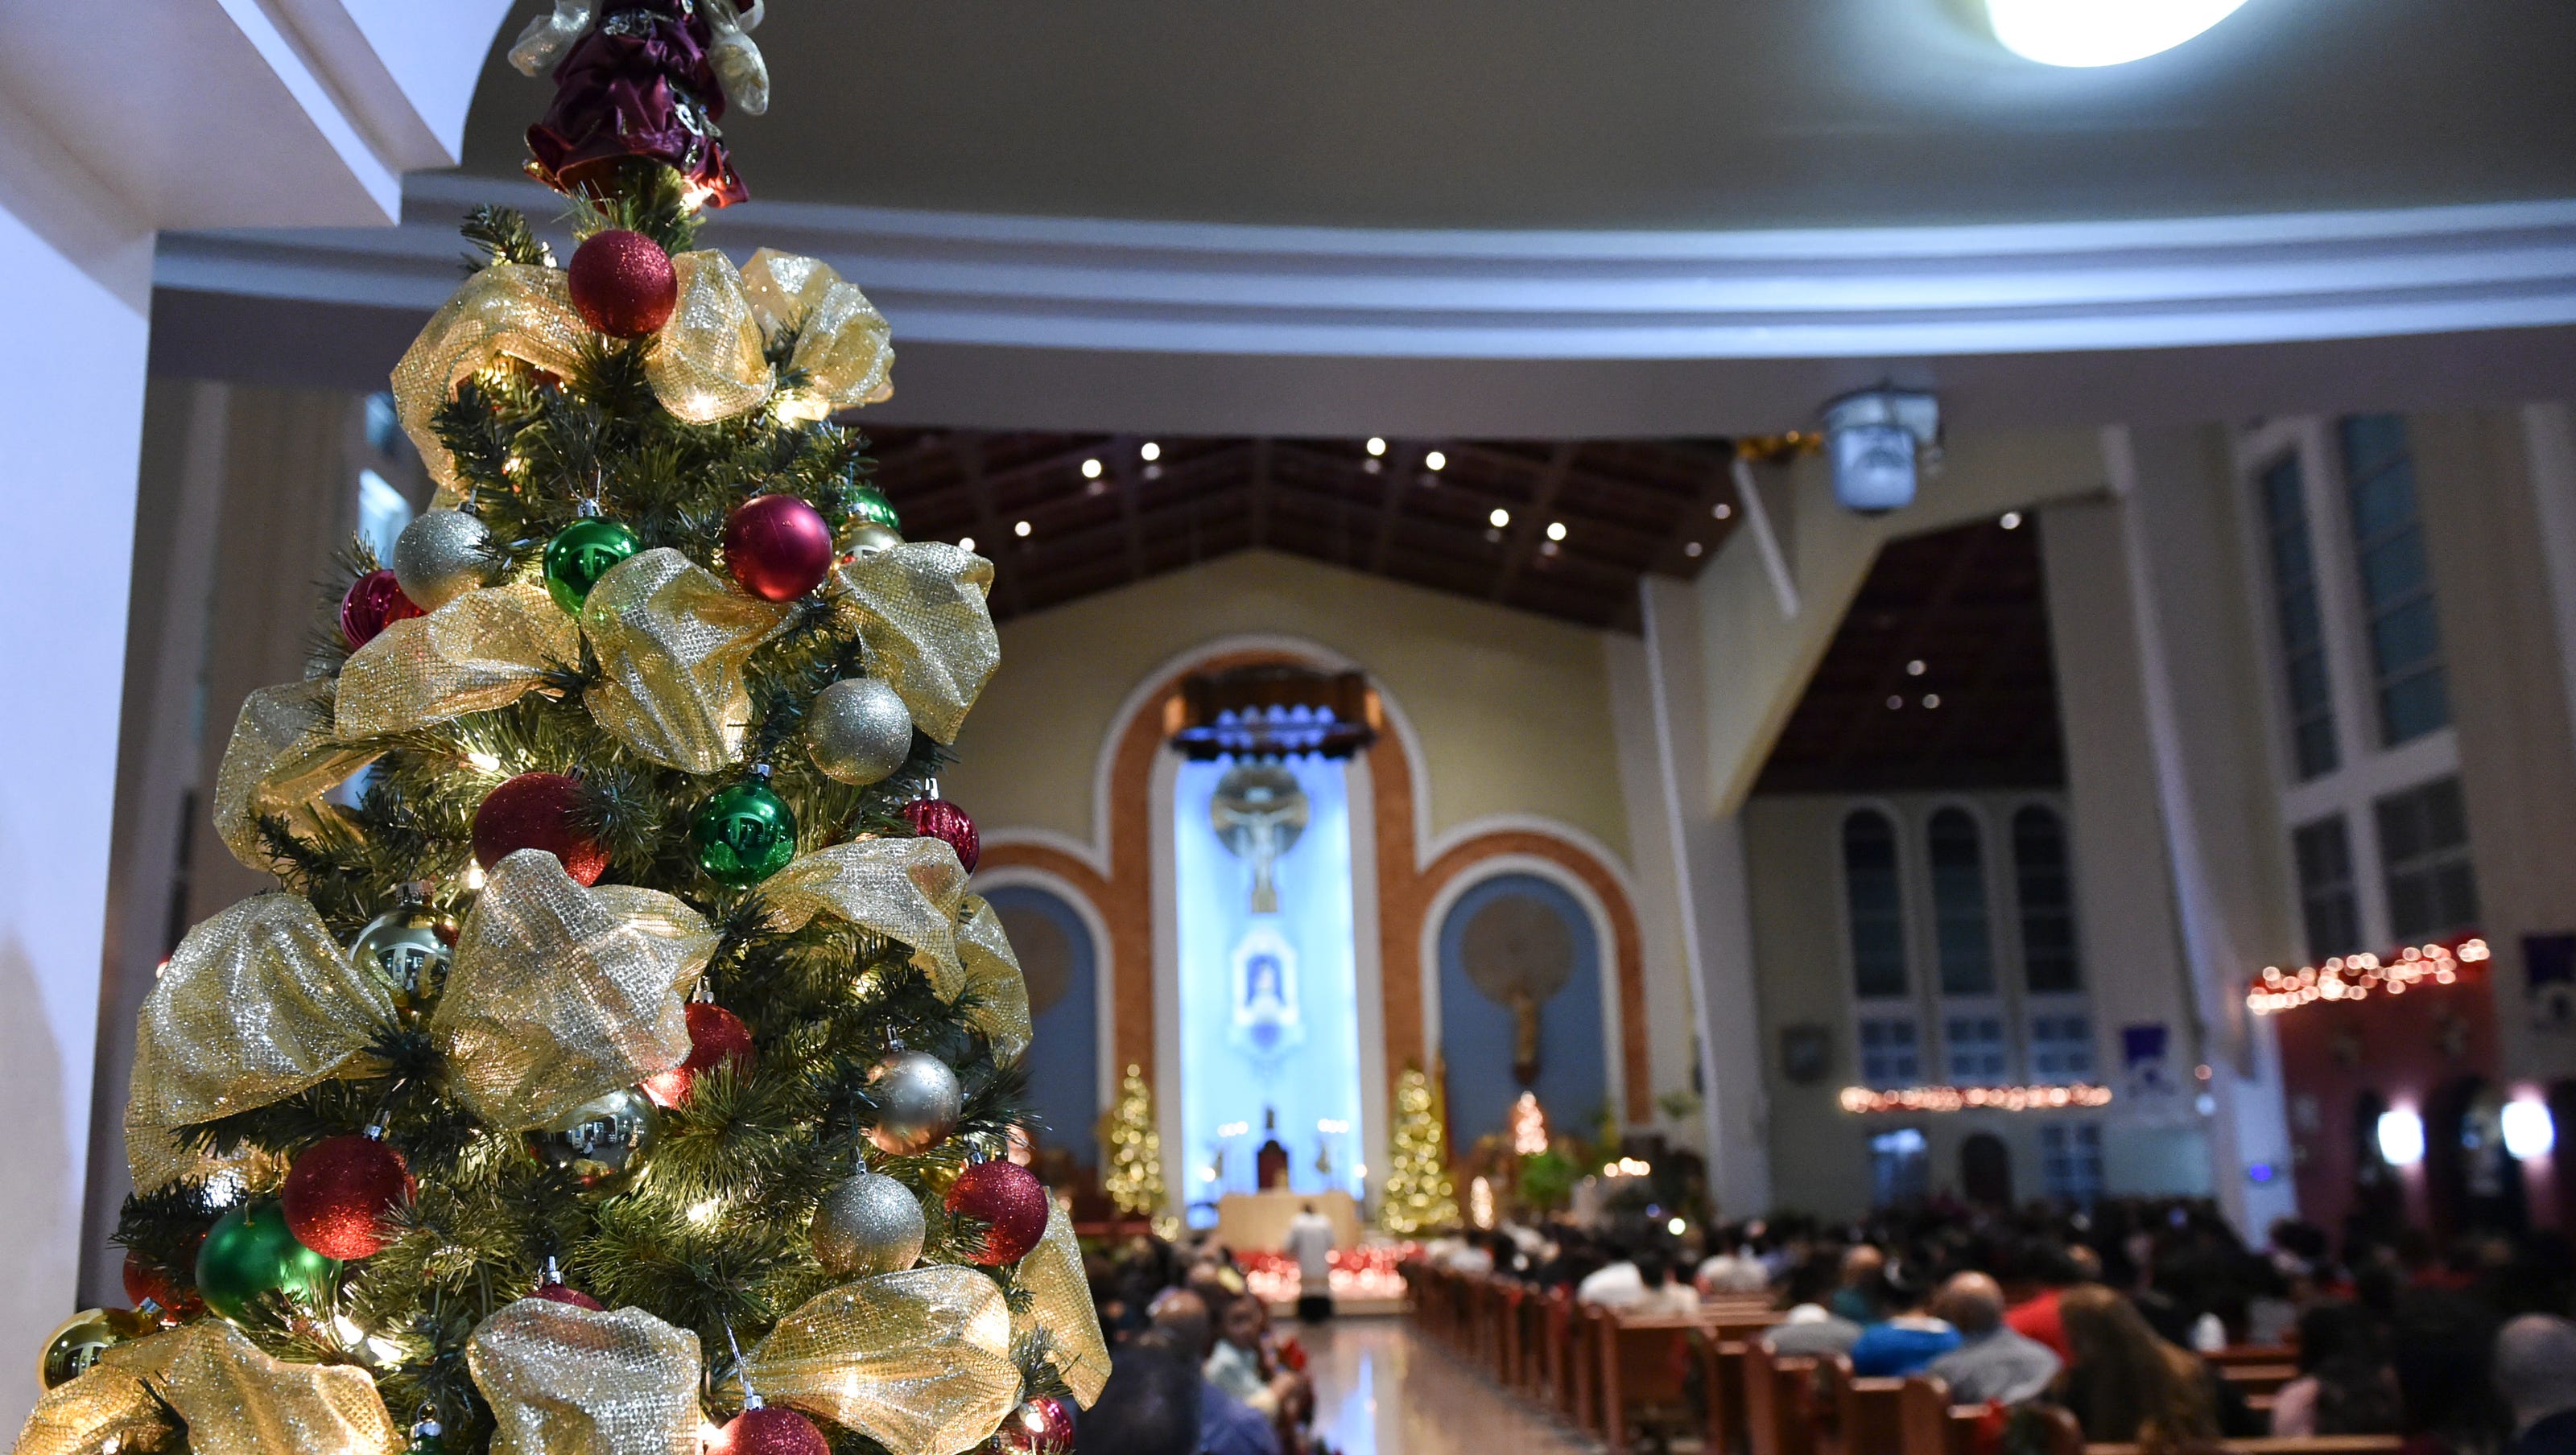 Mass schedule for Christmas Eve, Christmas